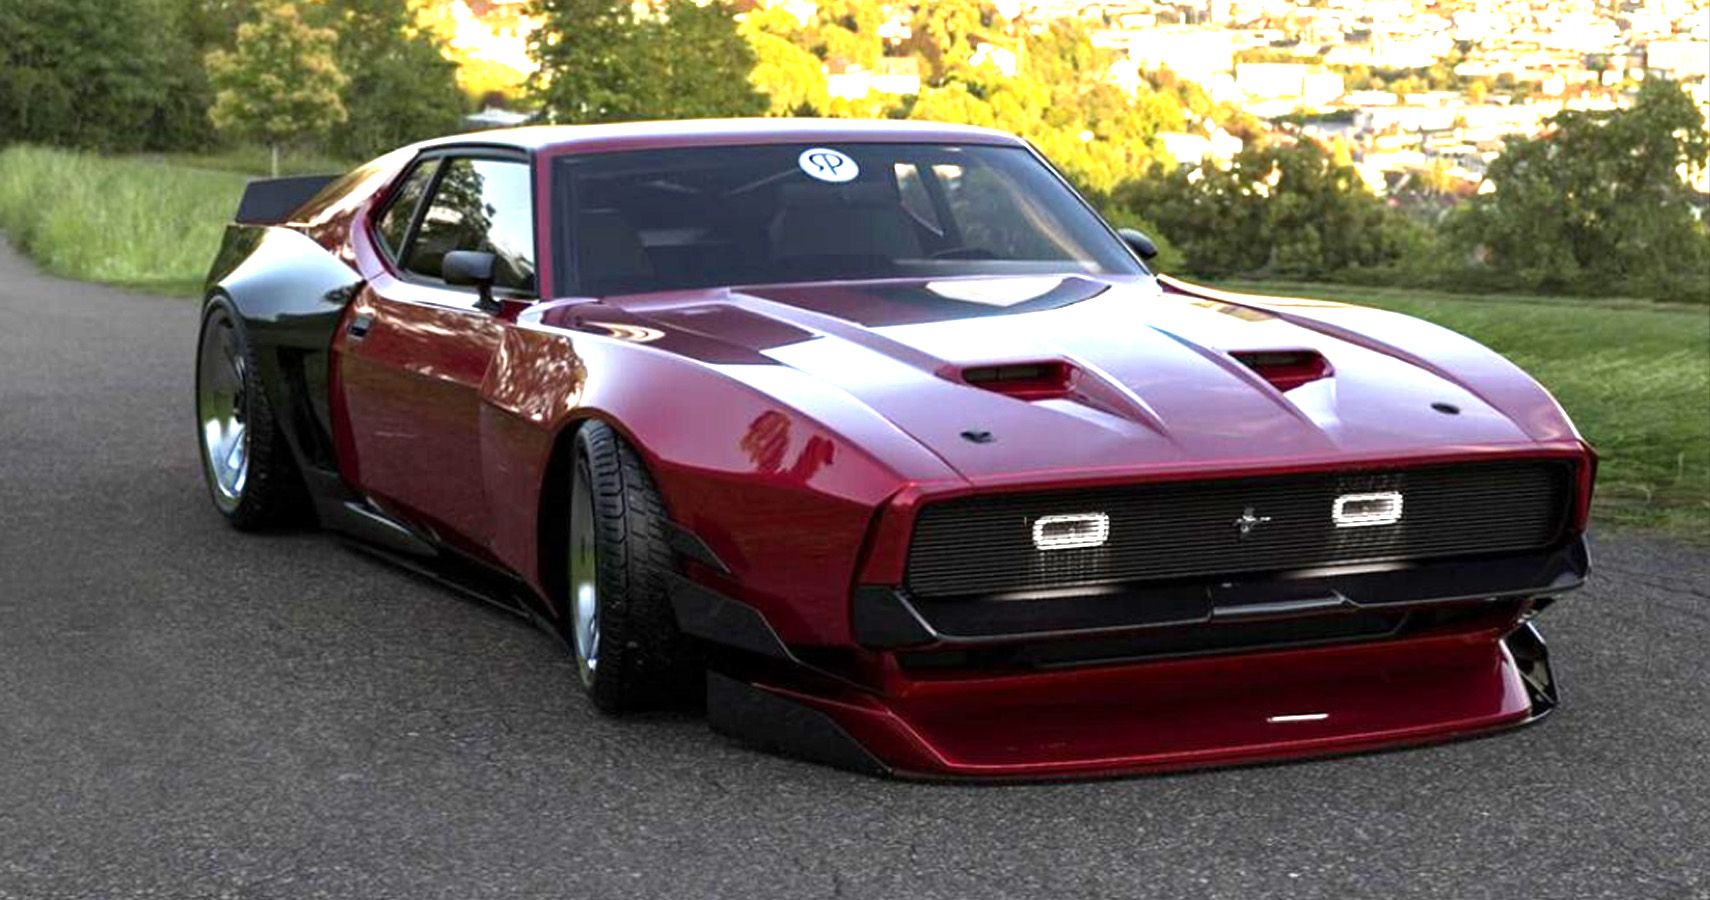 Digital rendering of red Ford Mustang Mach 1 front view